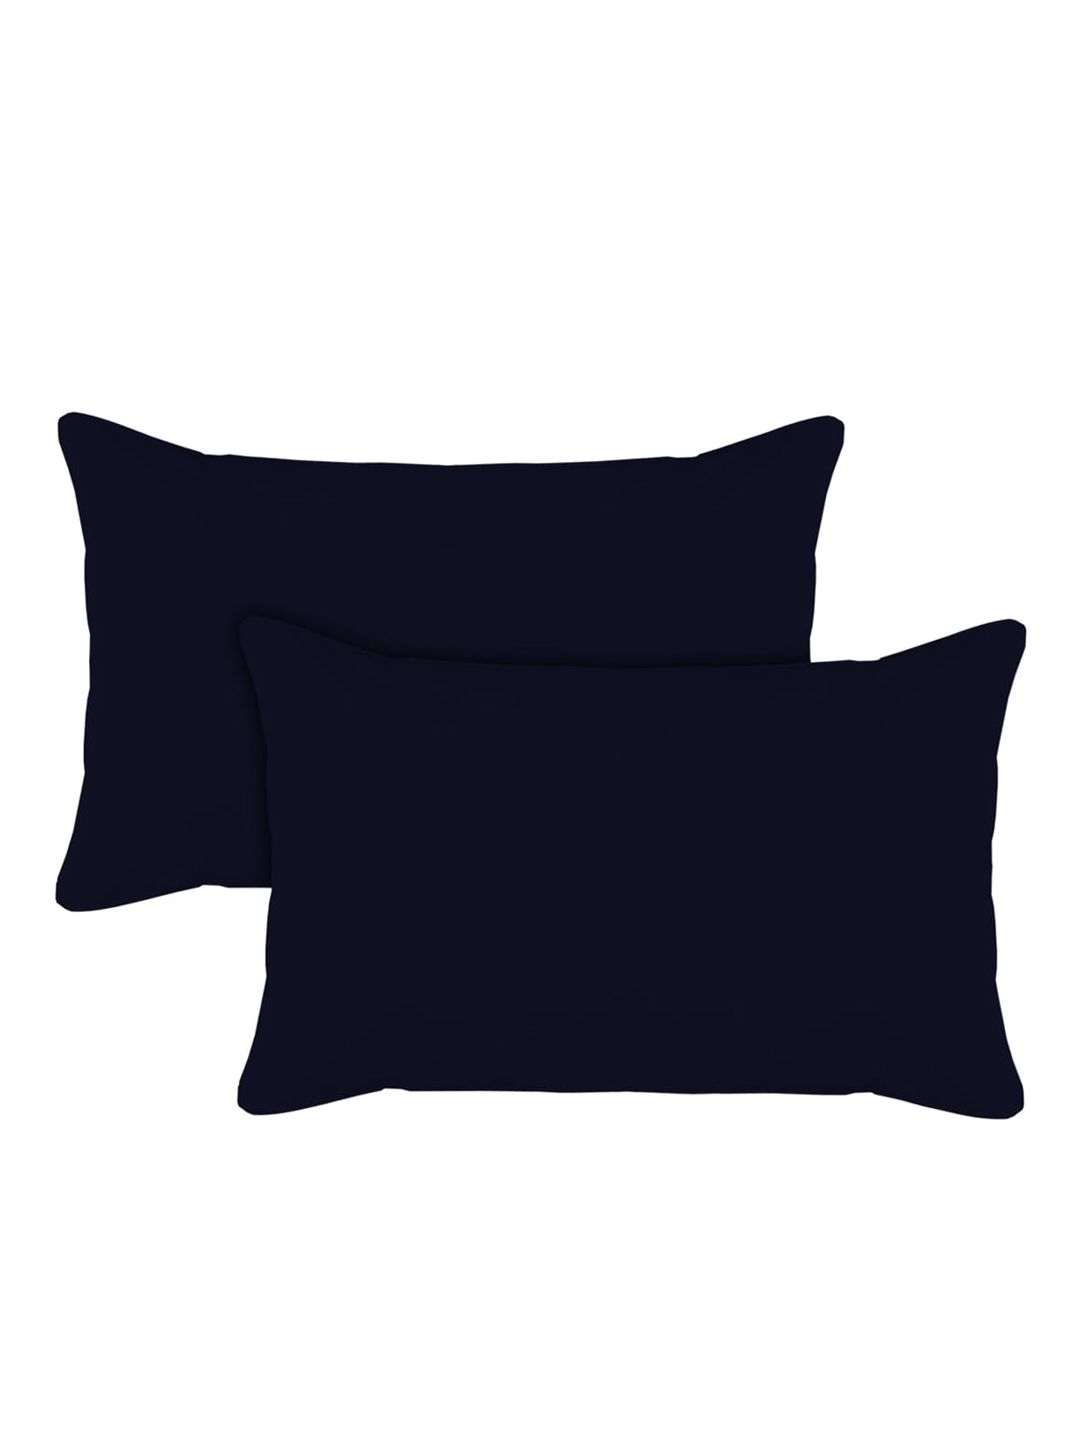 Kuber Industries Set Of 2 Navy Blue Solid Soft Throw Inserts With Microfiber Filled Pillows Price in India